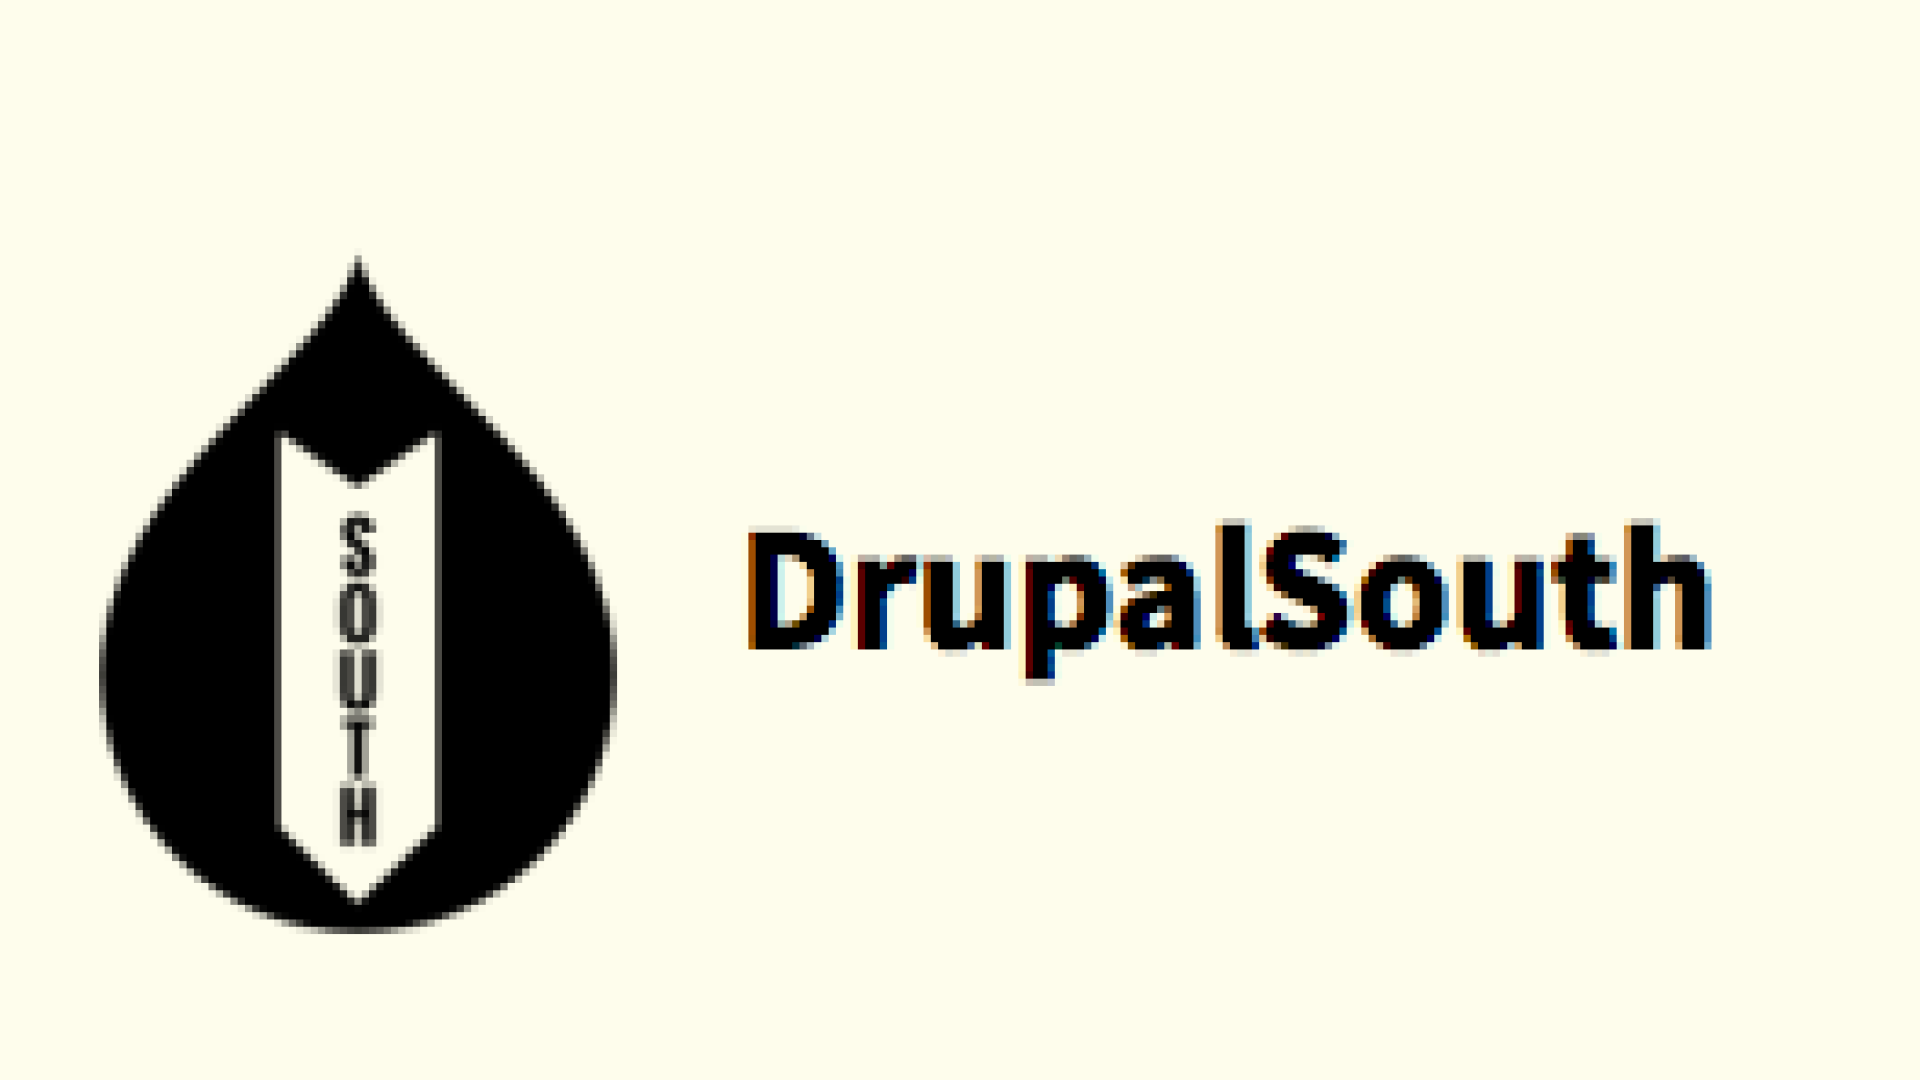 DrupalSouth